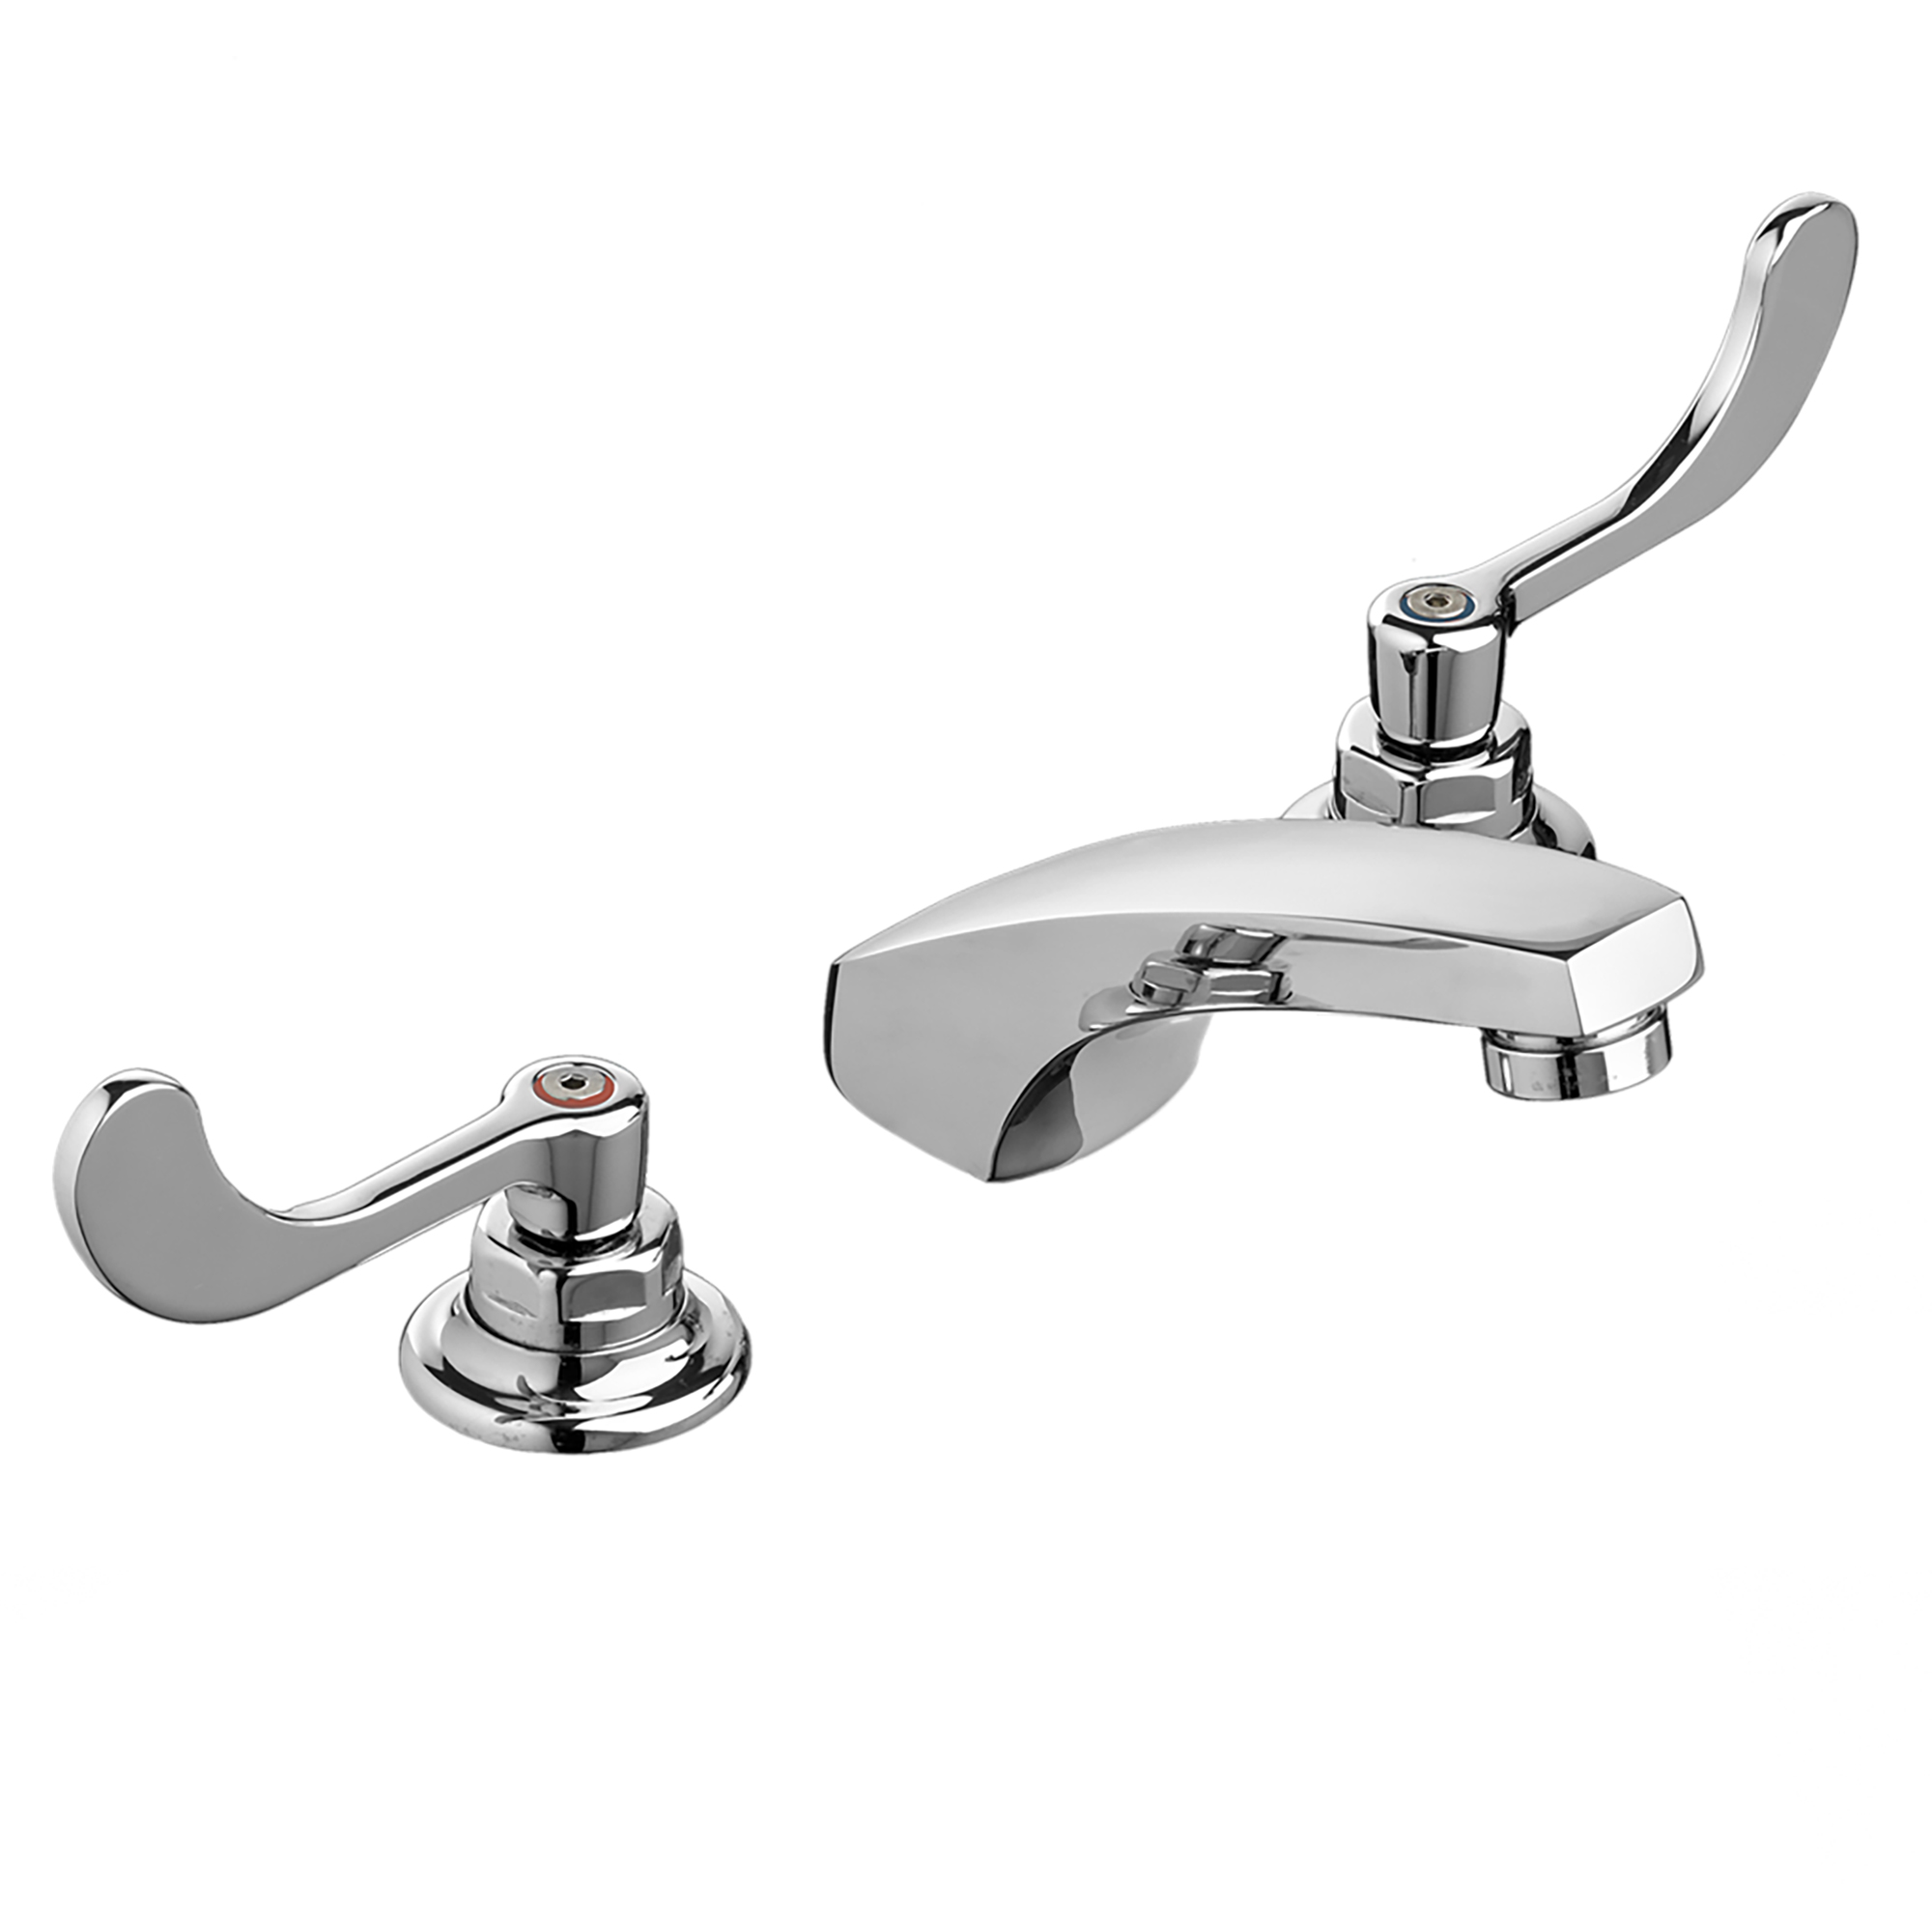 Monterrey™ 8-Inch Widespread Cast Faucet With Wrist Blade Handles 1.5 gpm/5.7 Lpm With Flexible Underbody